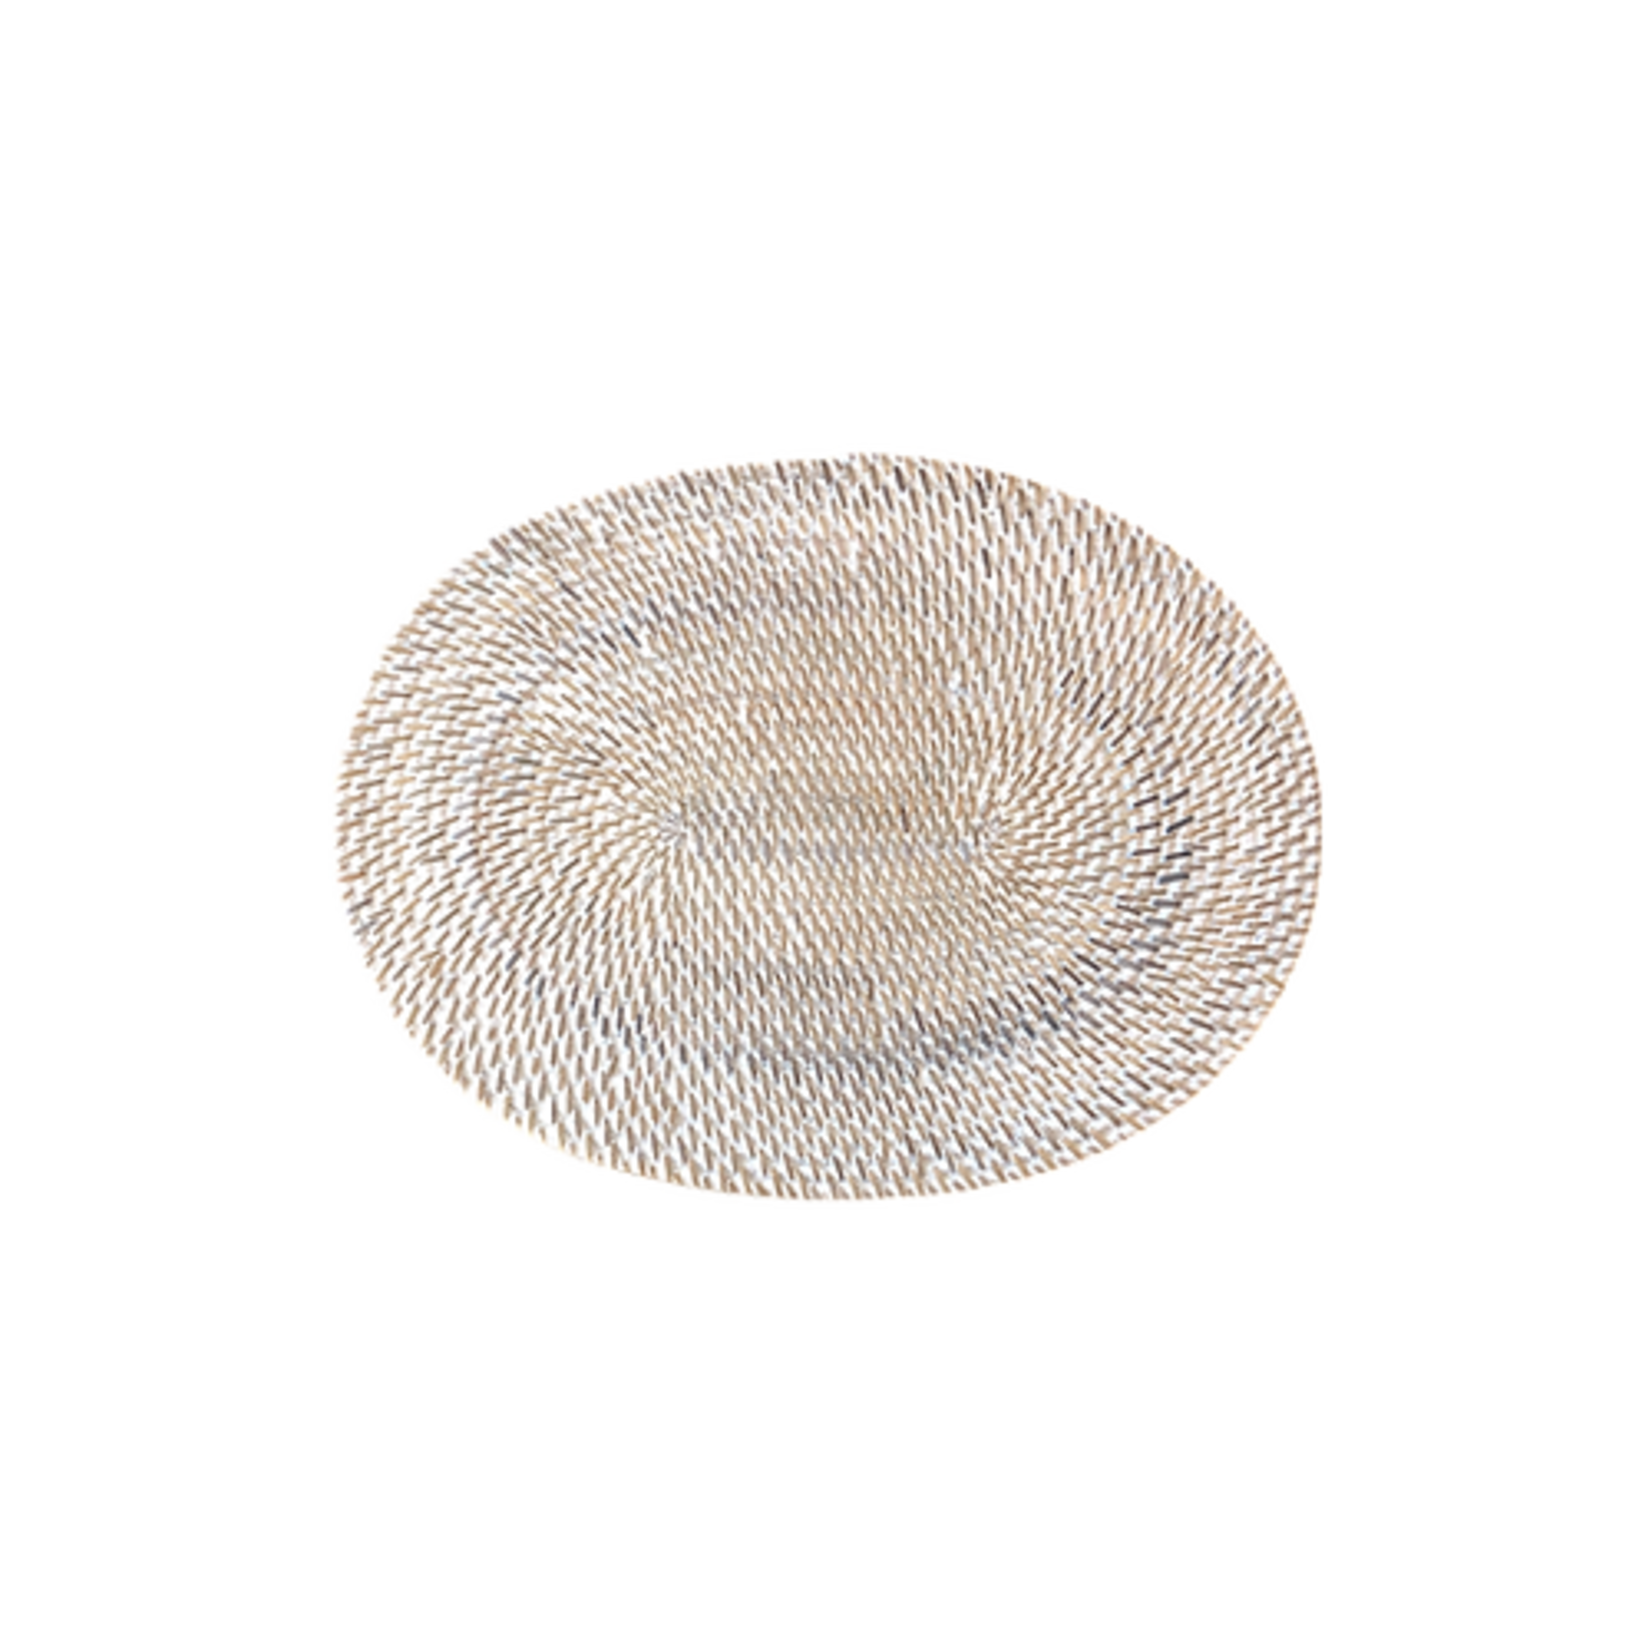 Cantiq Living Ata Placemat Oval - White Washed